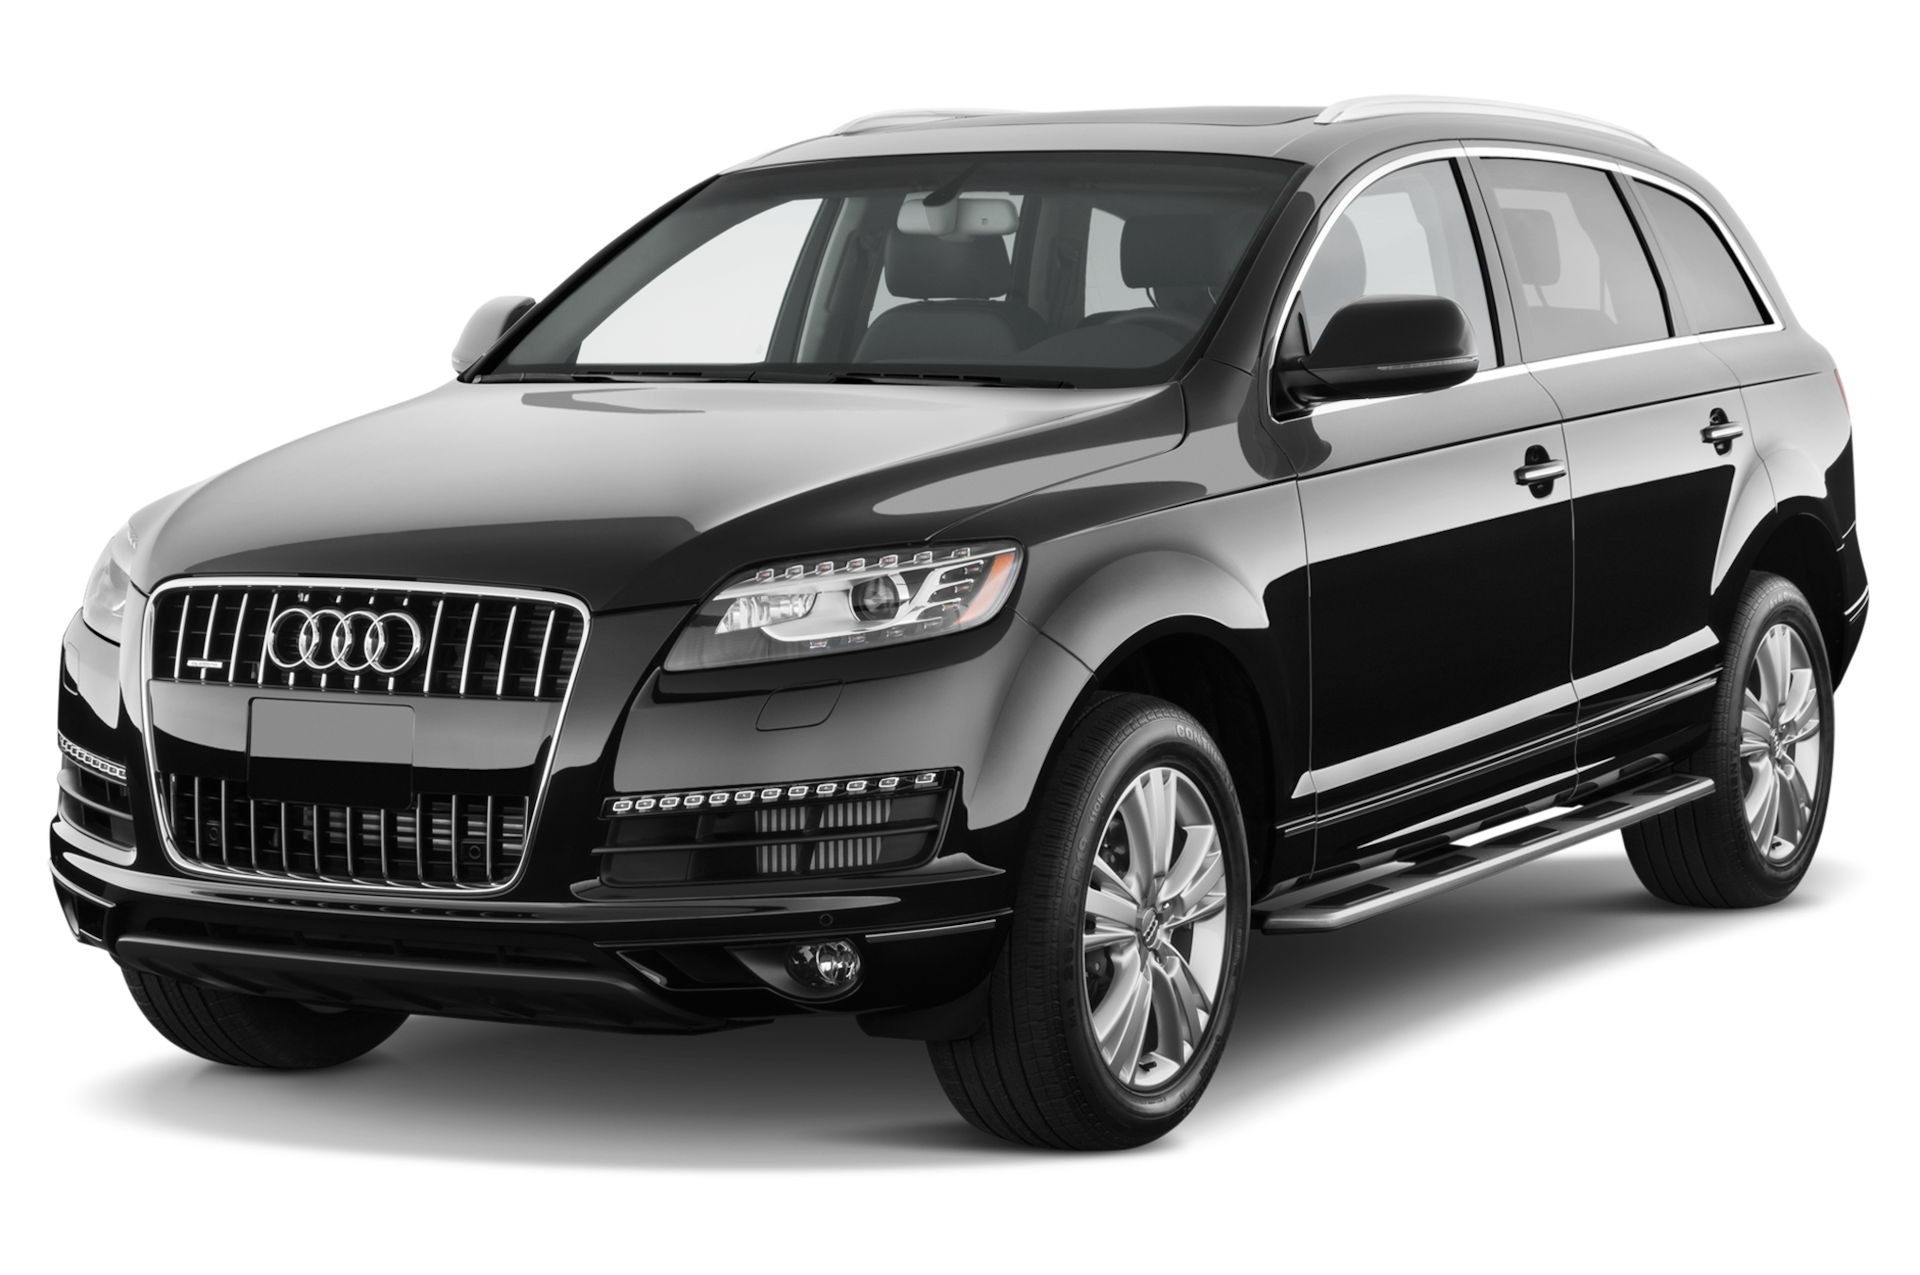 2013 Audi Q7 Prices, Reviews, and Photos - MotorTrend